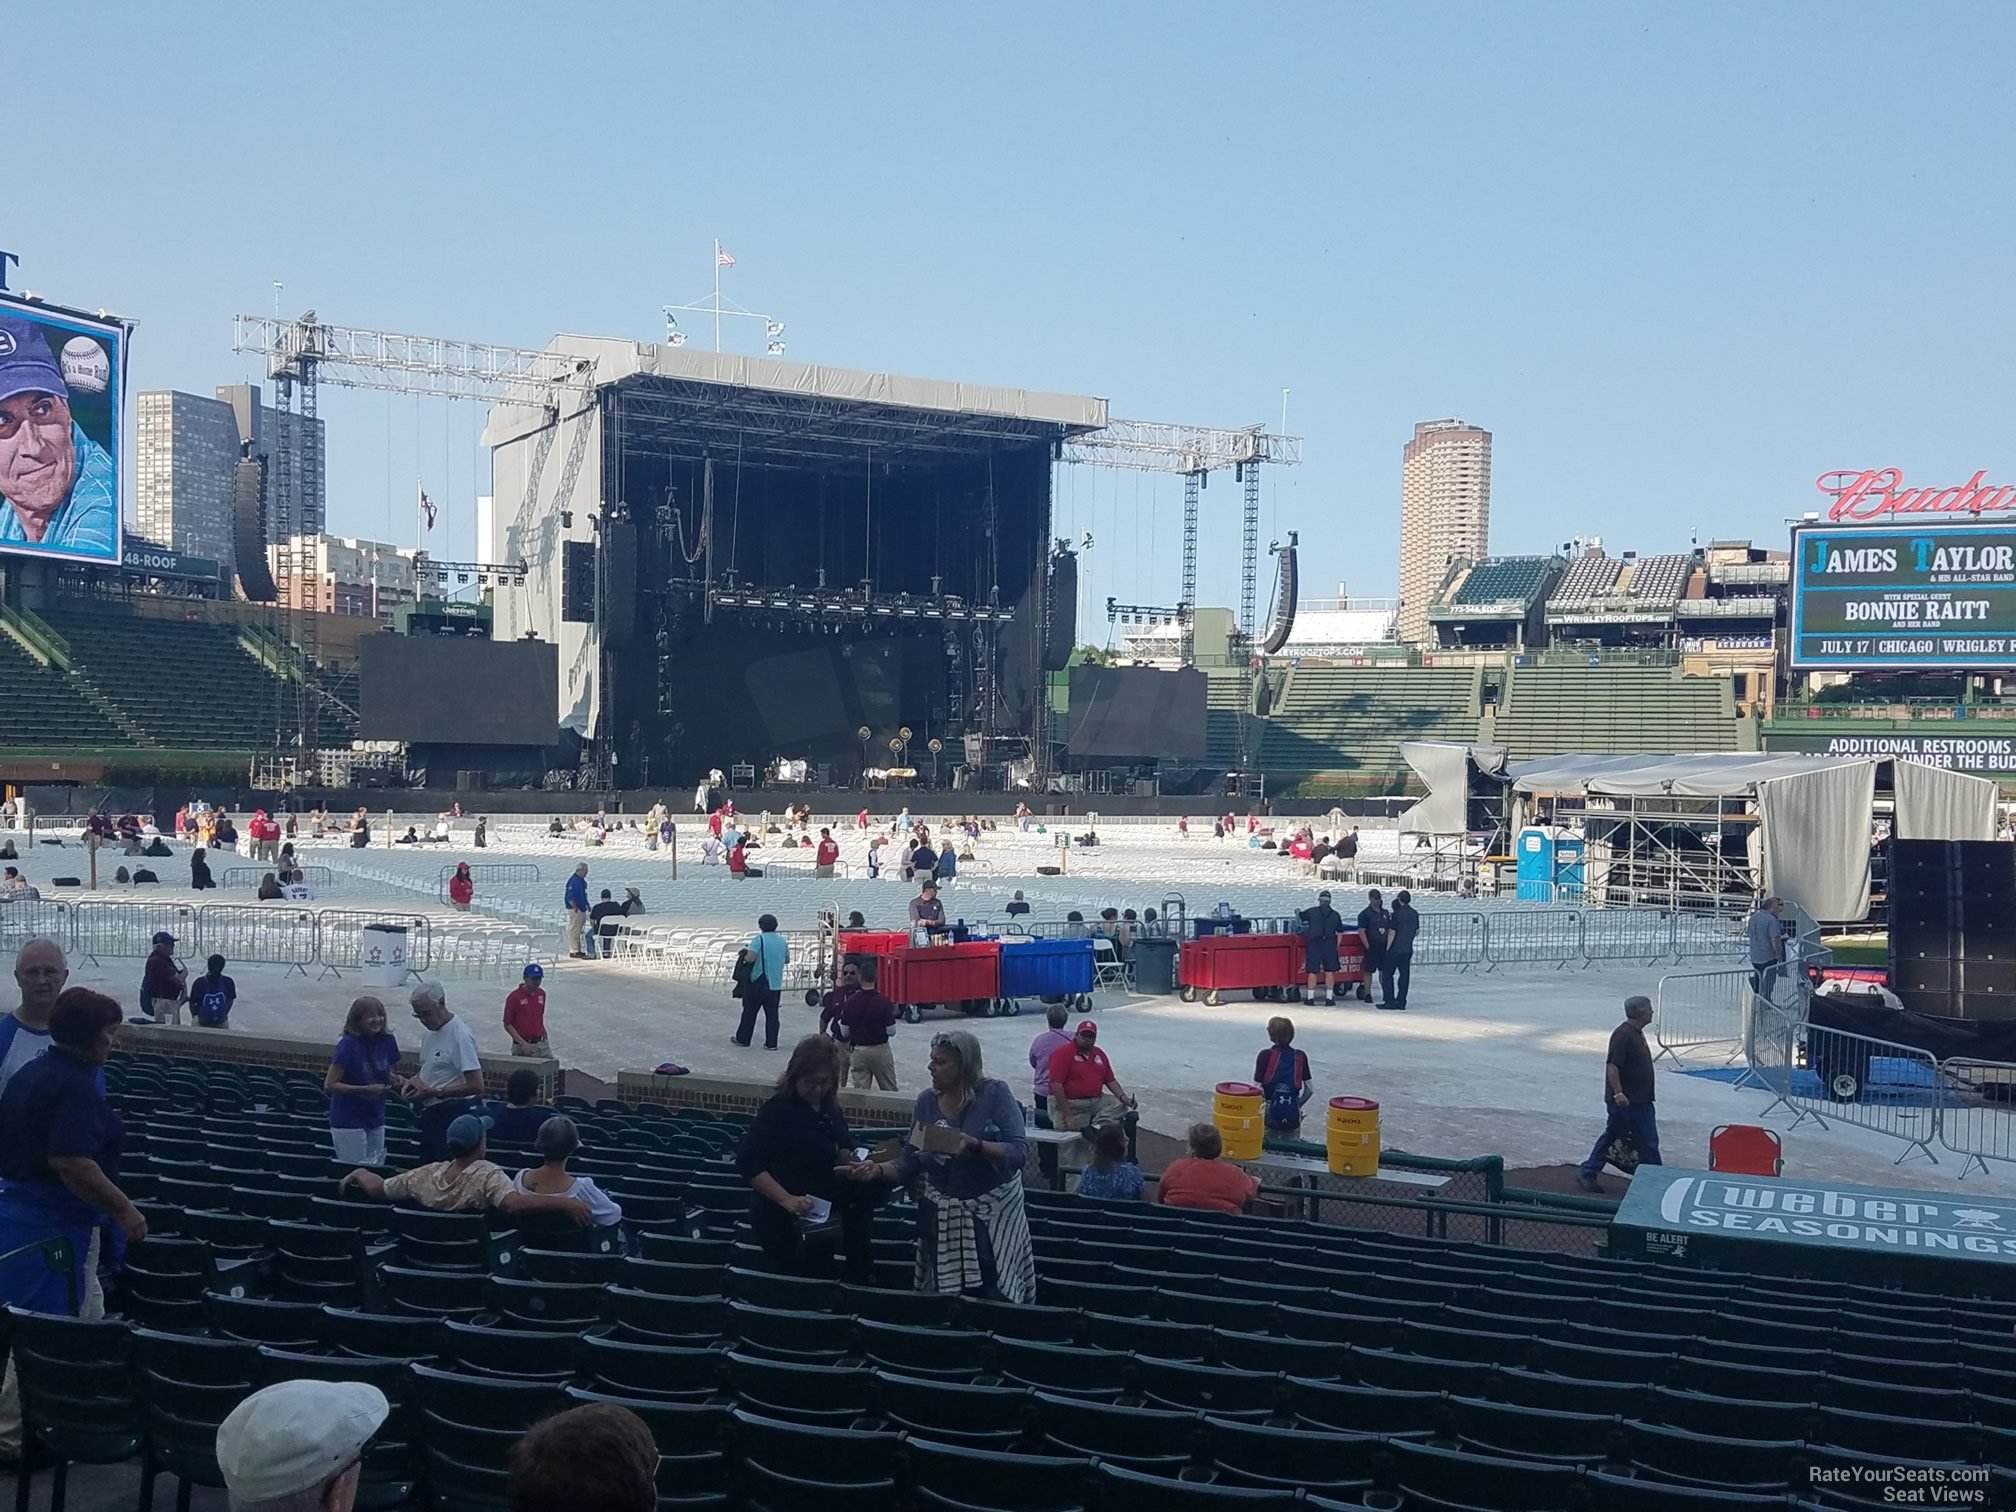 section 110, row 4 seat view  for concert - wrigley field